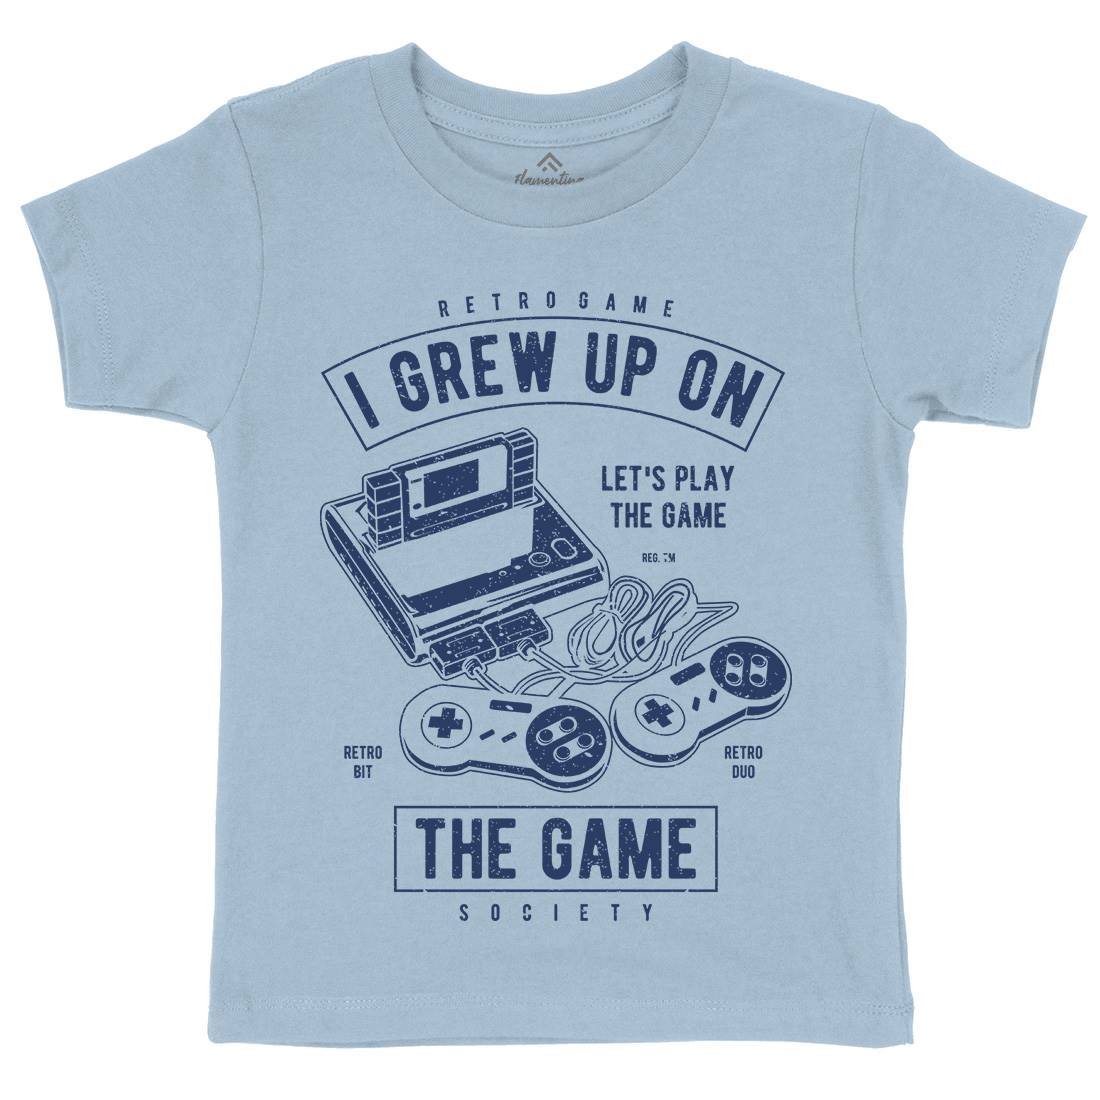 Grew Up On The Game Kids Organic Crew Neck T-Shirt Geek A679